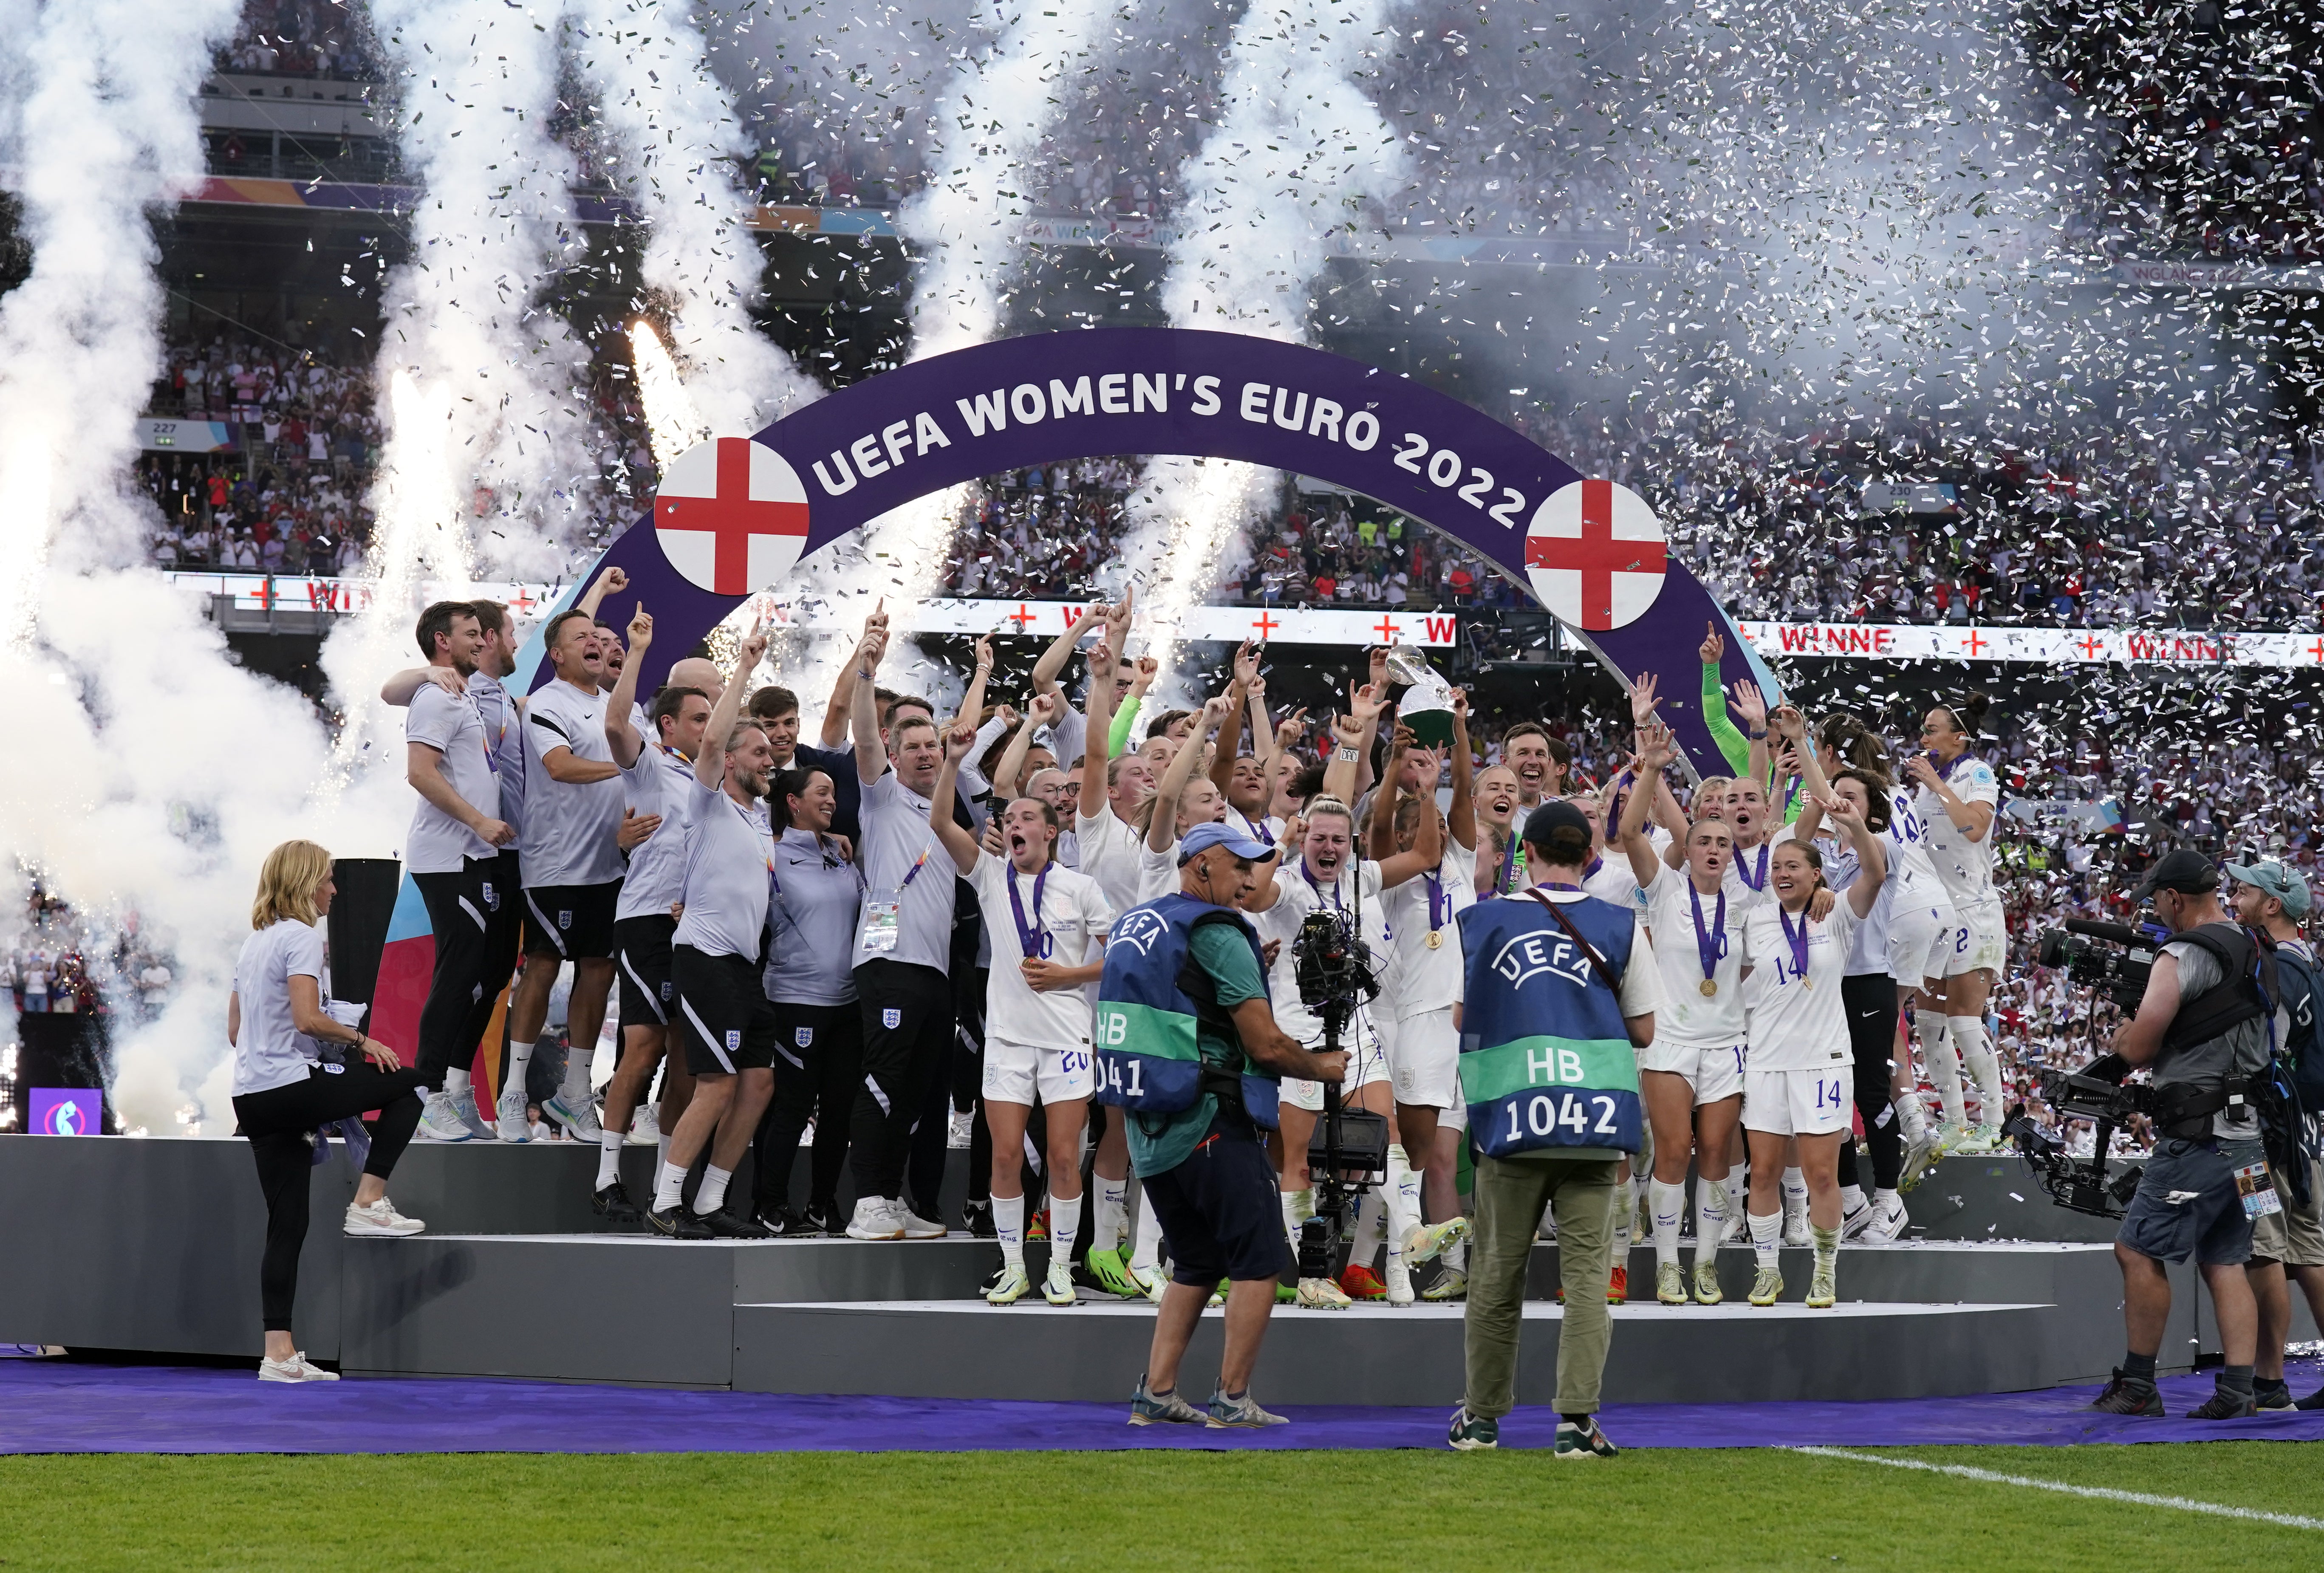 England beat Germany to win Euro 2022 in July